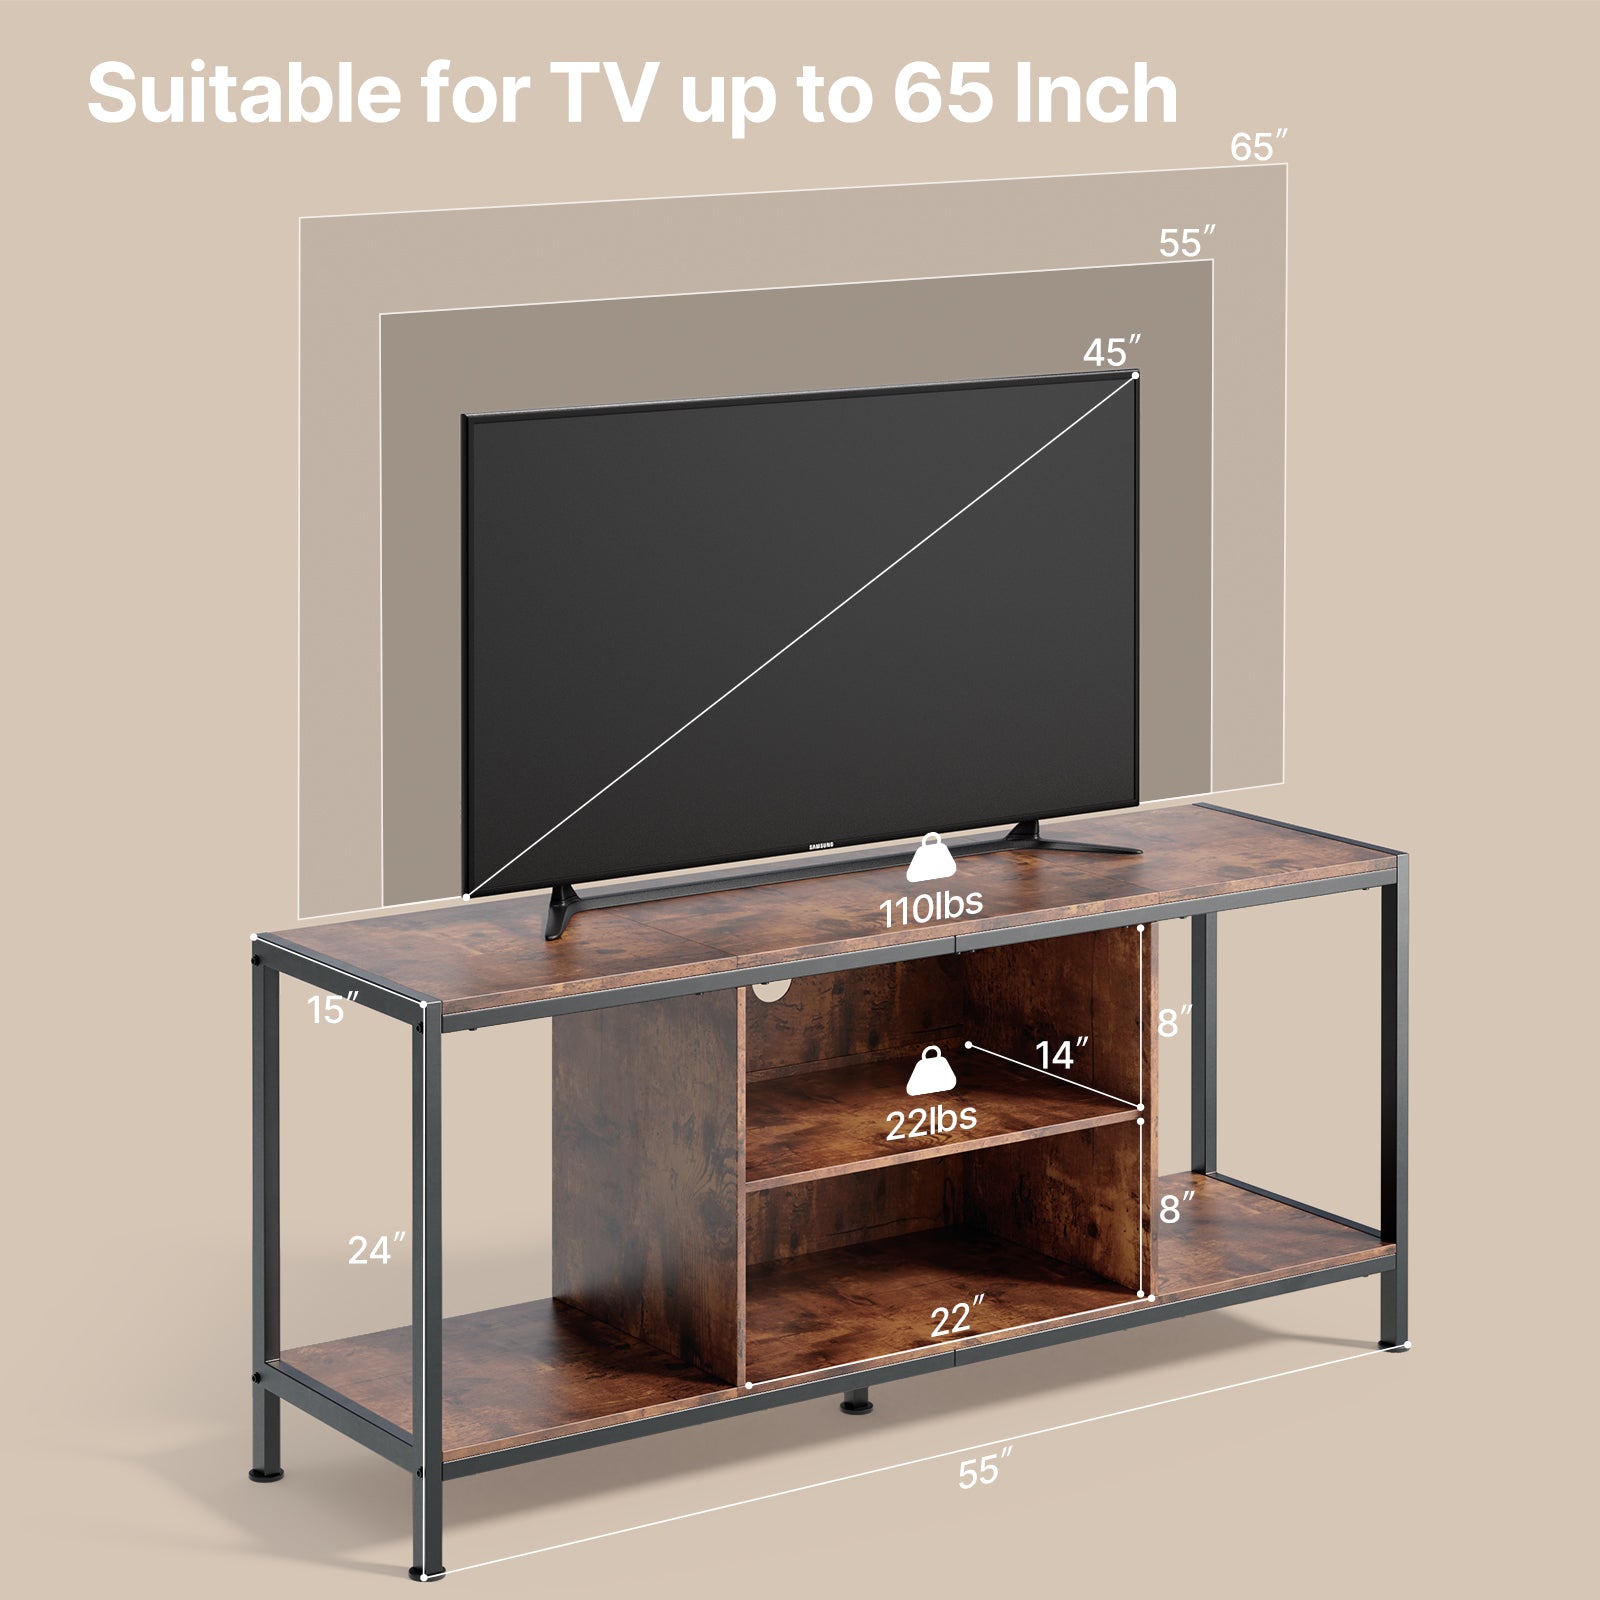 Gizoon AT21 Wooden TV Console Table for TV up to 65 Inch with Storage Shelves